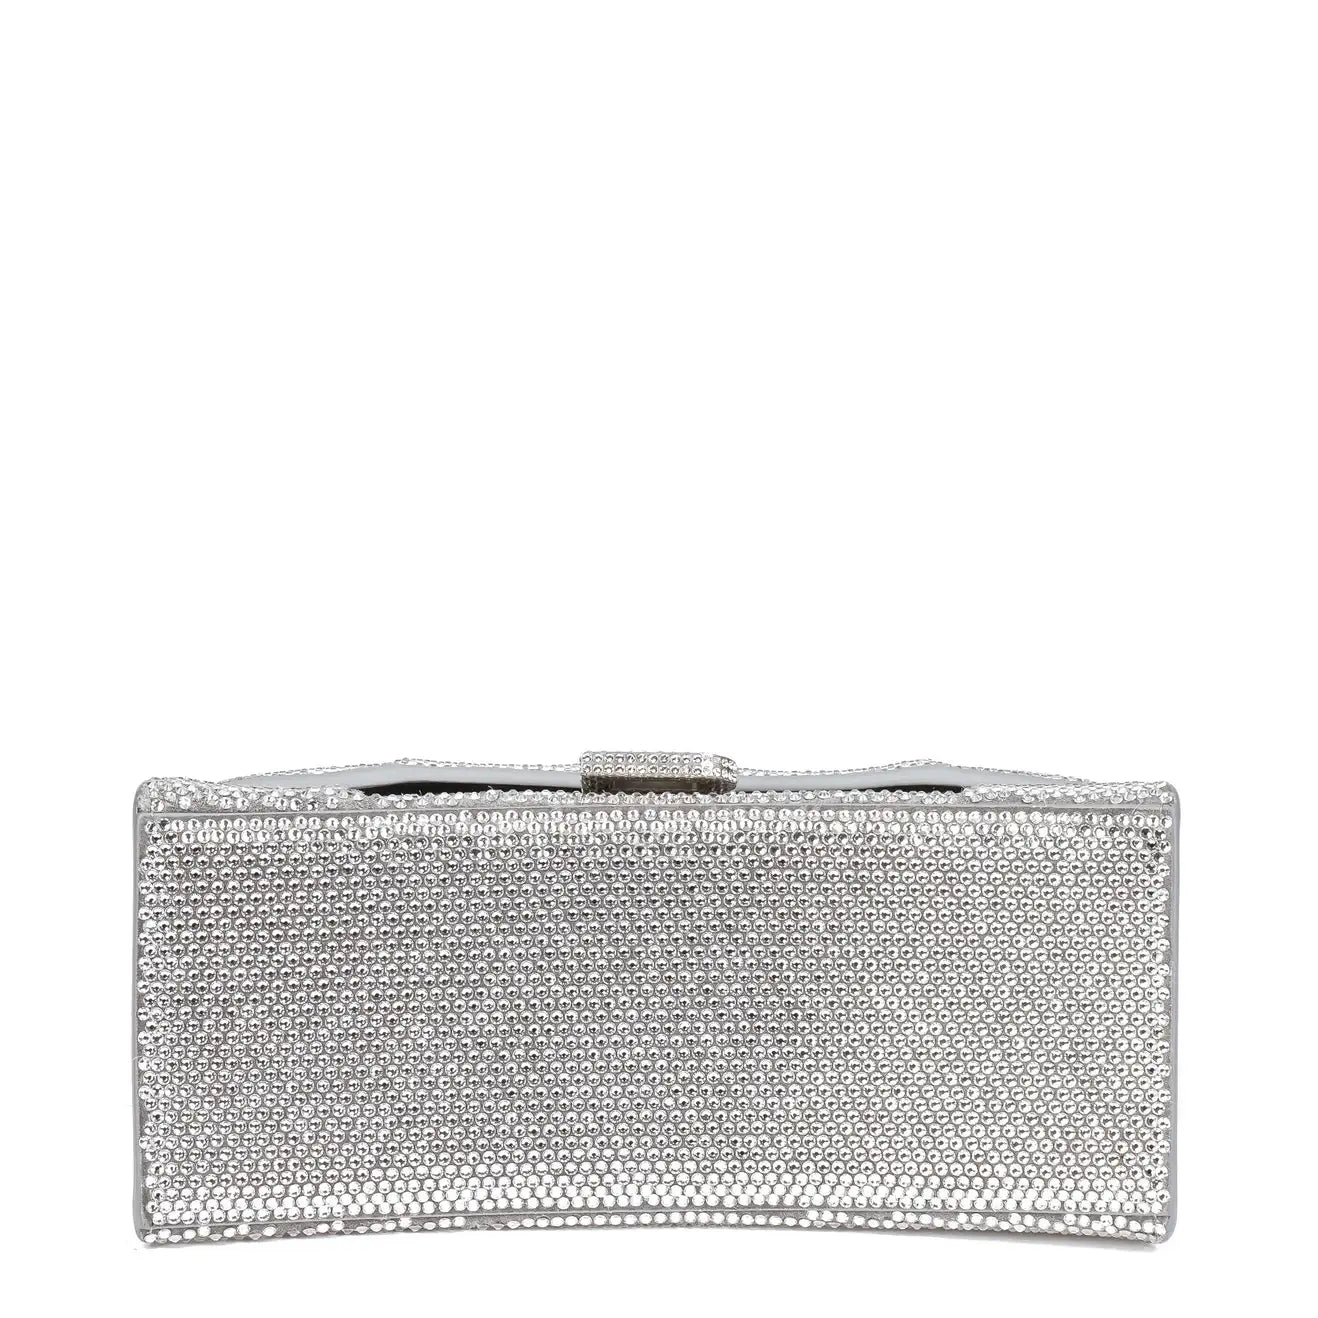 Hourglass Top-handle Bag With Rhinestones Silver